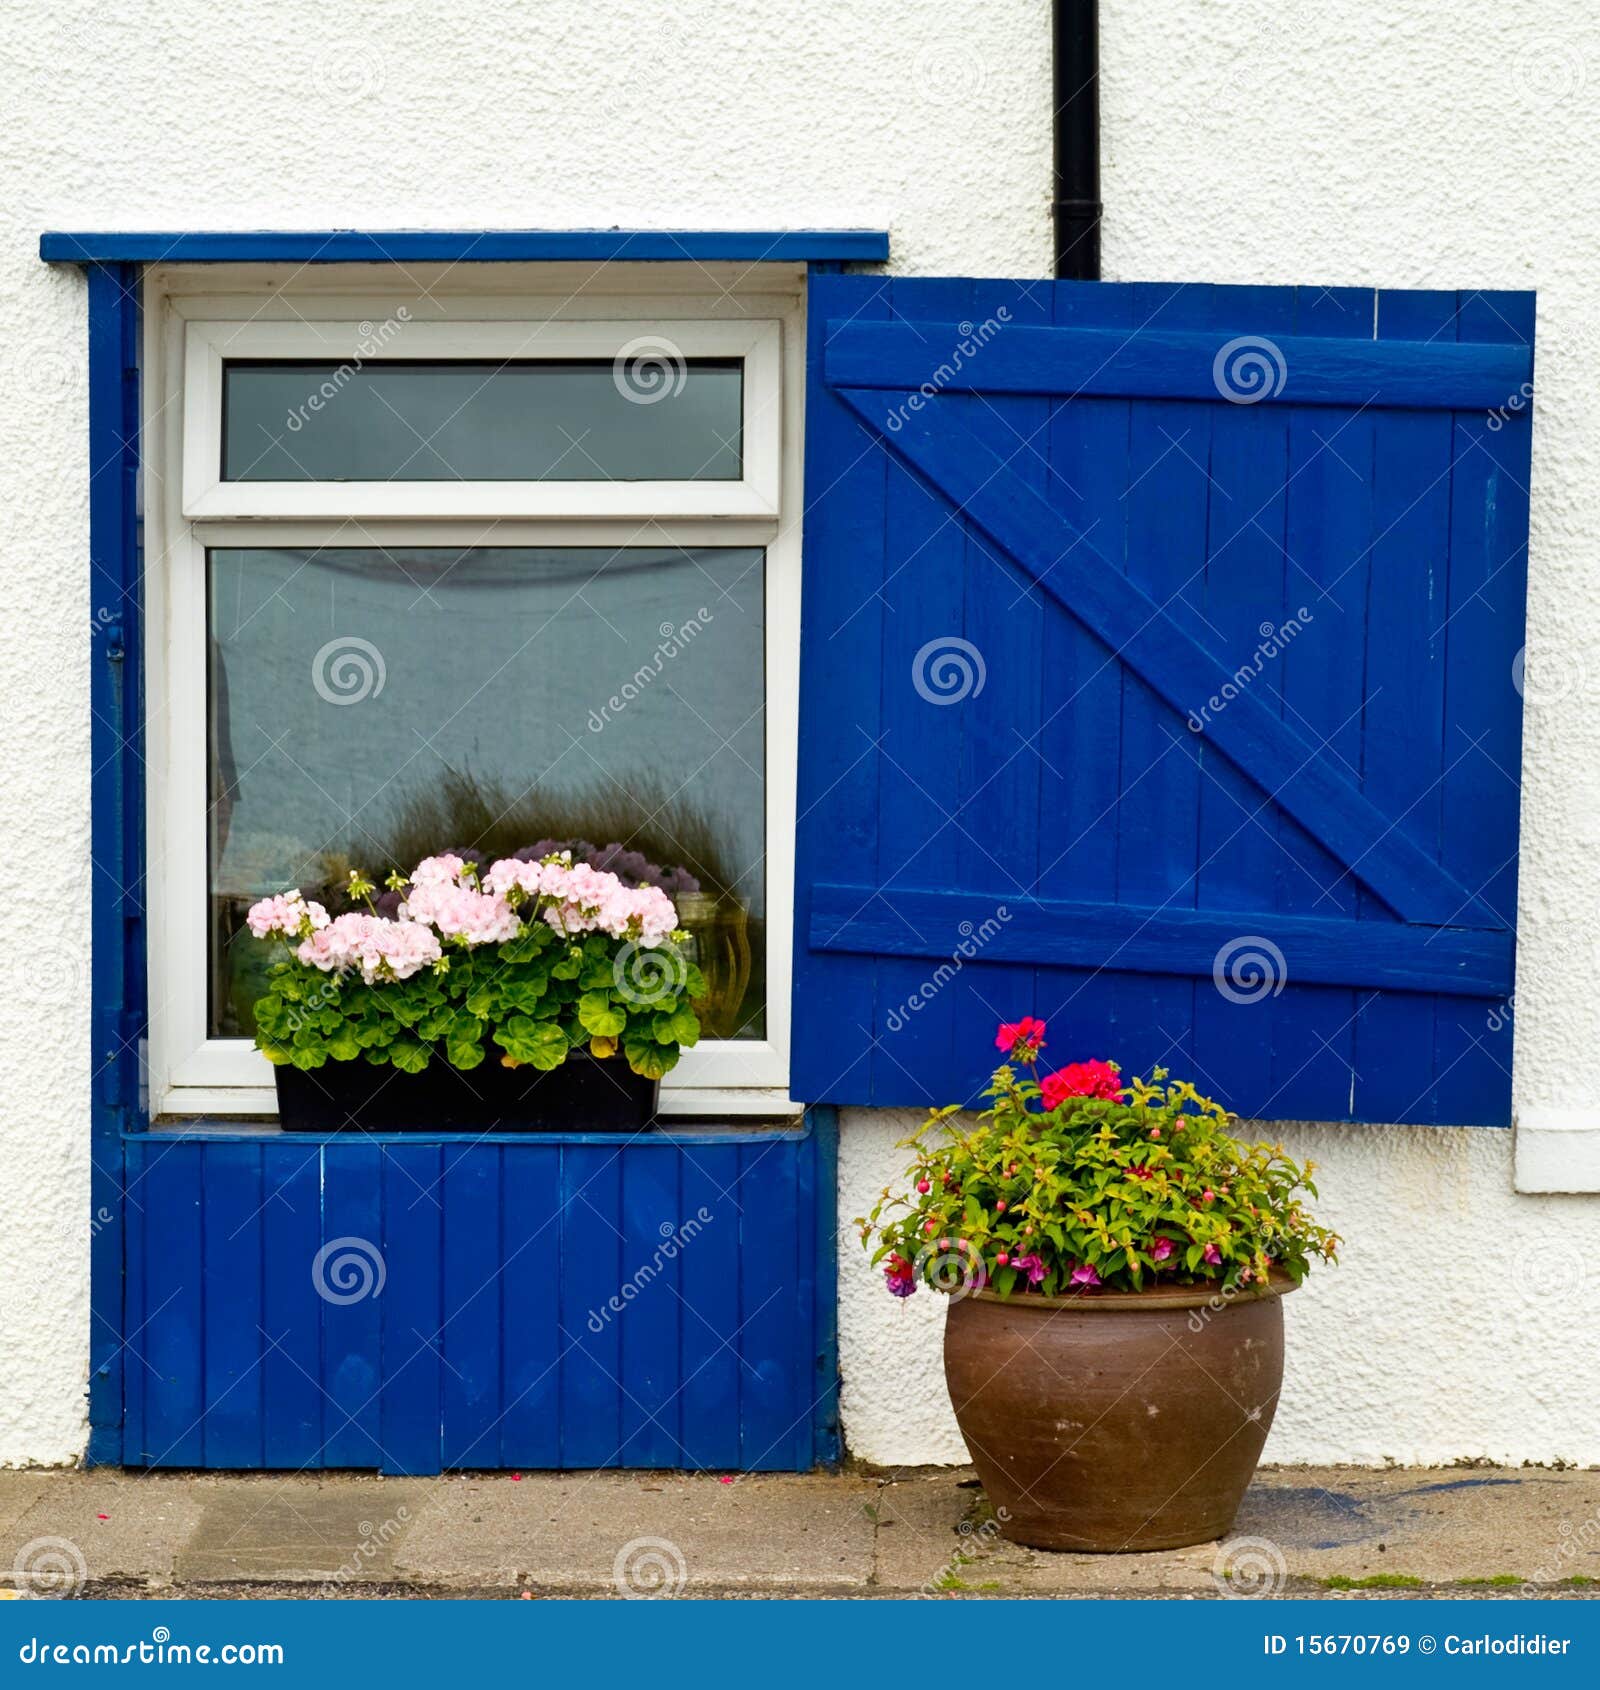 Window With Blue Wooden Blinds And Flowers Royalty Free Stock Images 